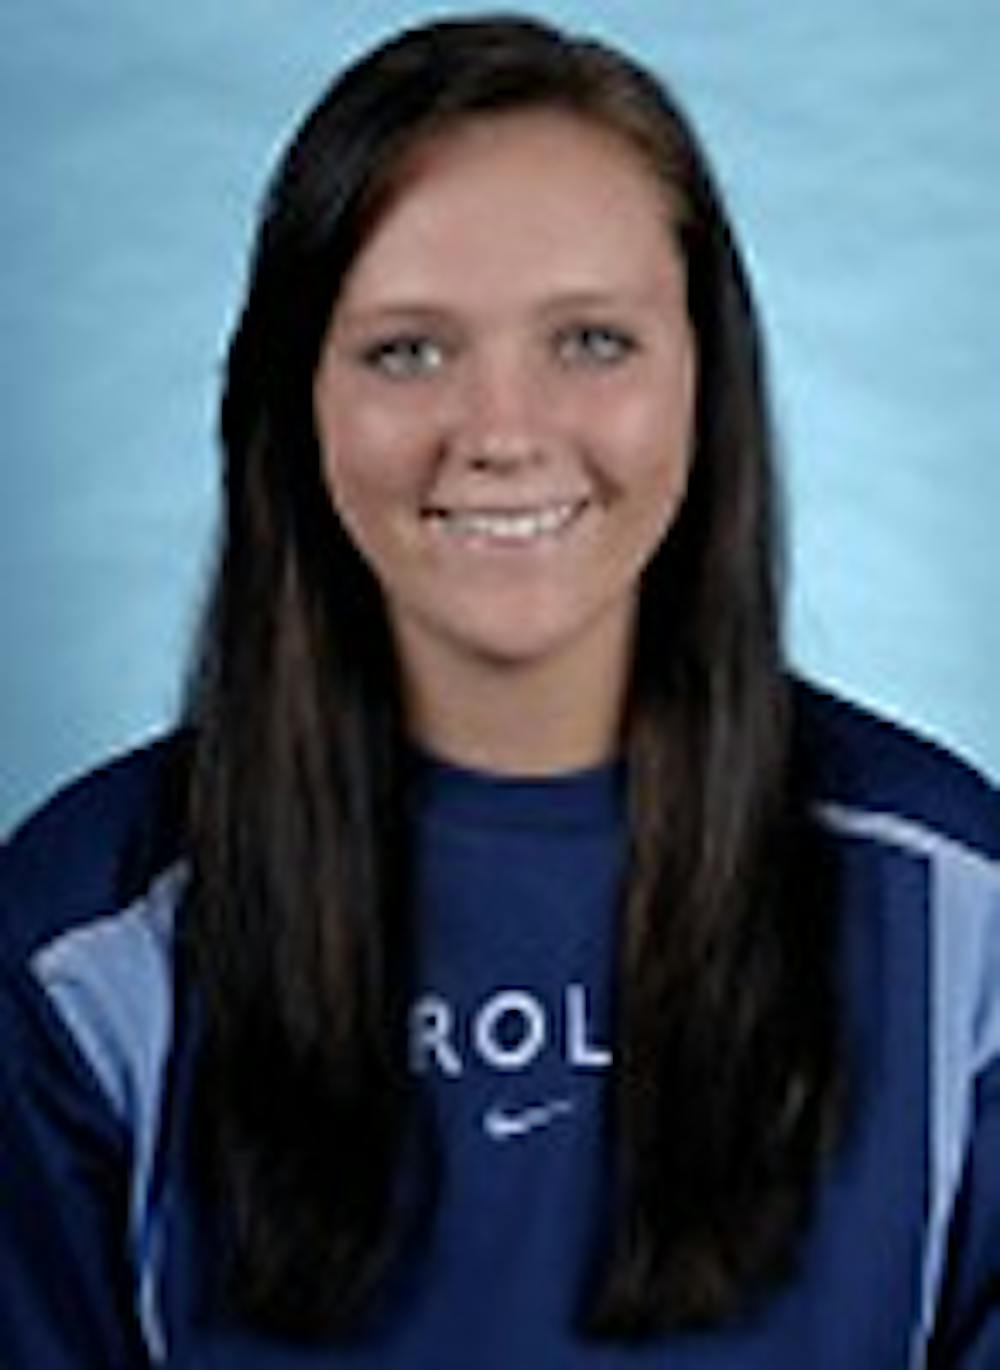 Freshman Haleigh Dickey set a school softball record for most home runs in a single game.